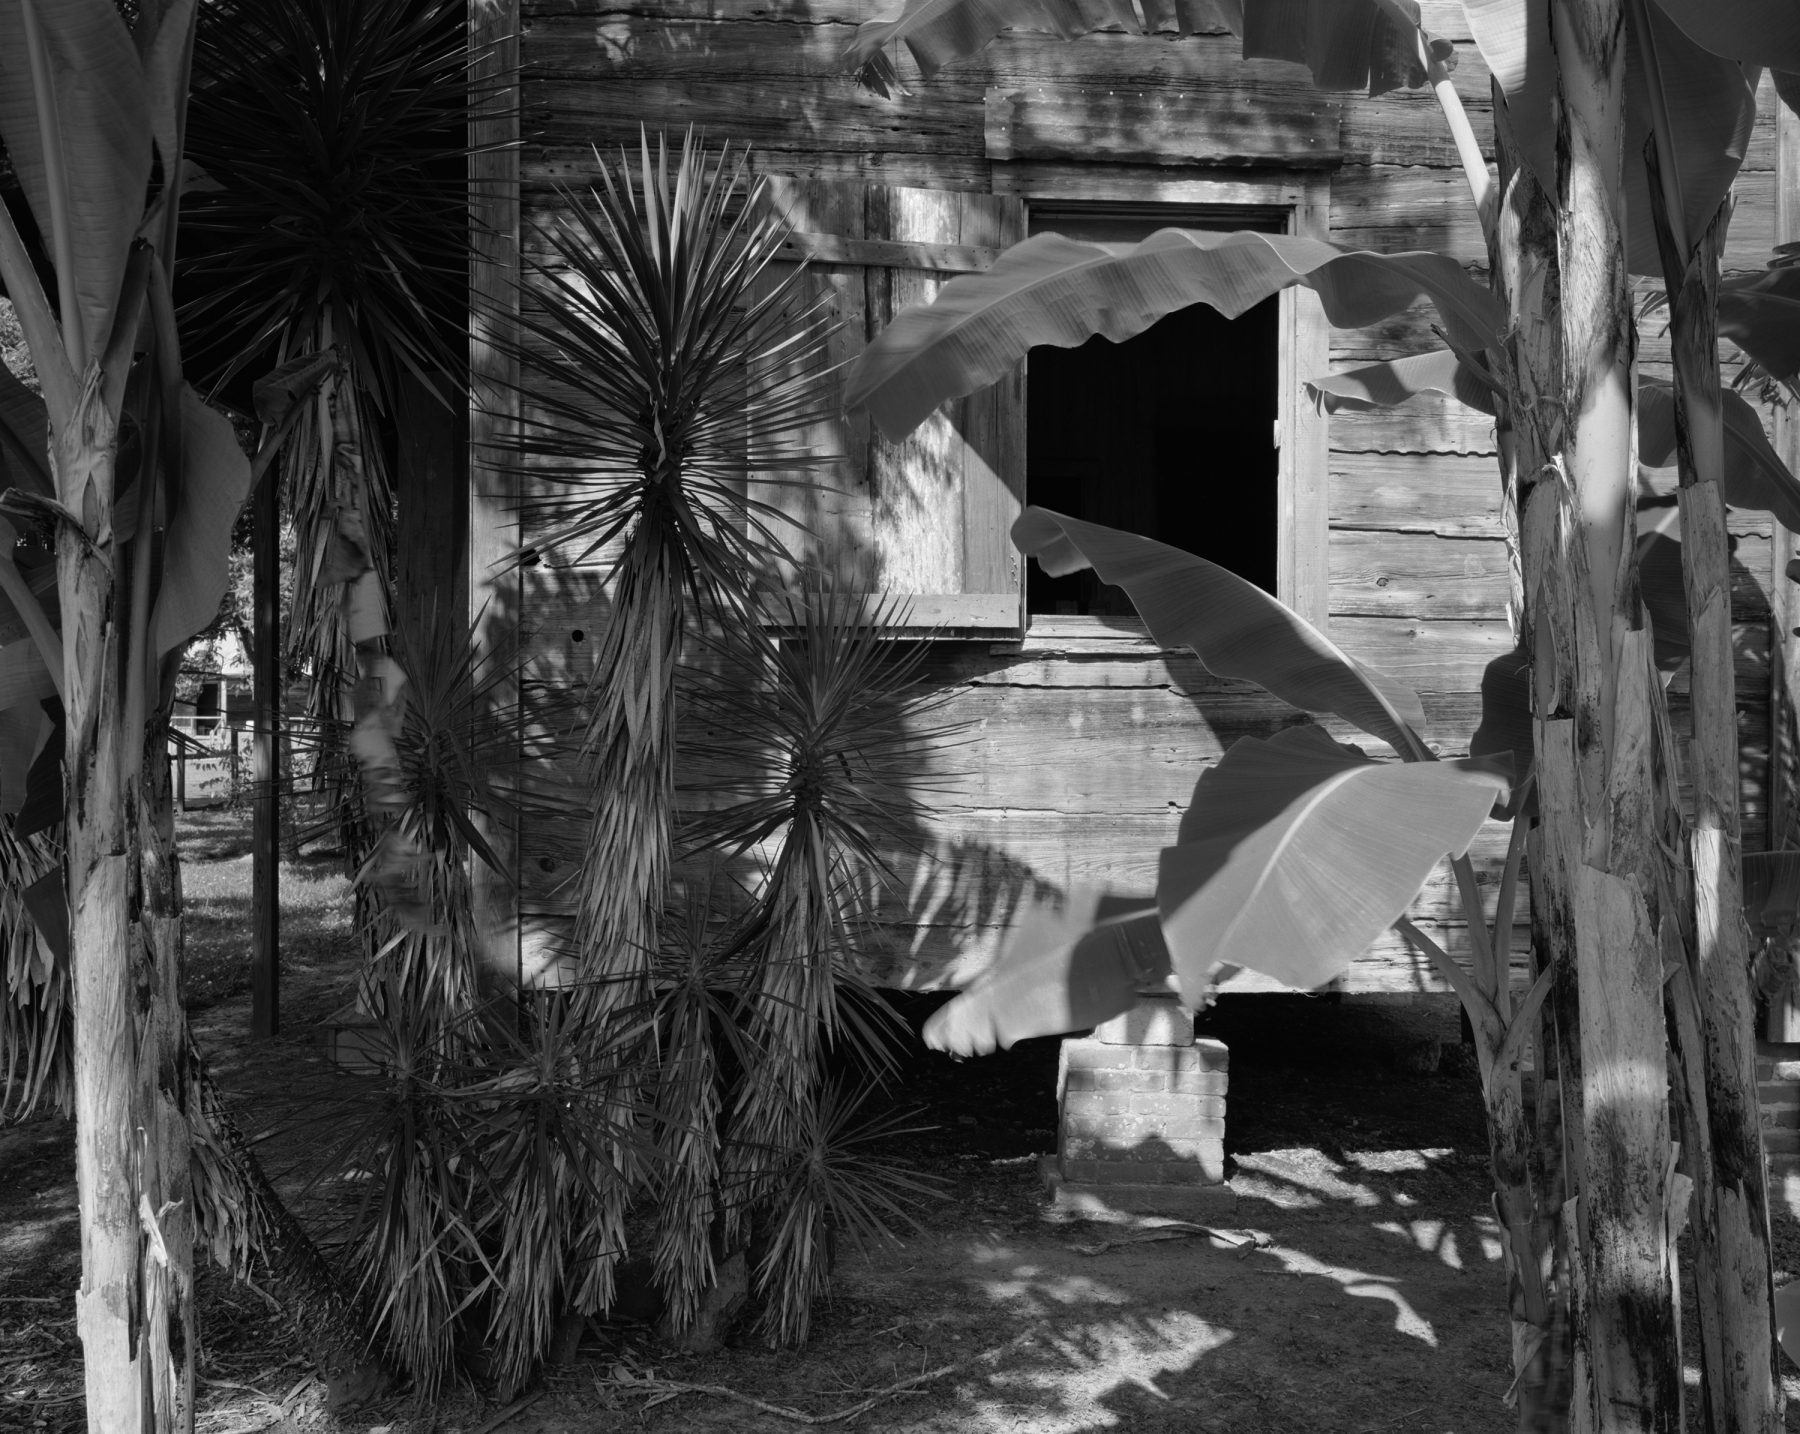 Cabin and Palm Trees, 2019
gelatin silver print
framed: 49 x 60 x 2 inches (124.5 x 152.4 x 5.1 cm)
edition of 6 with 2 APs&nbsp;
(DB-ITHP.19.12.2)